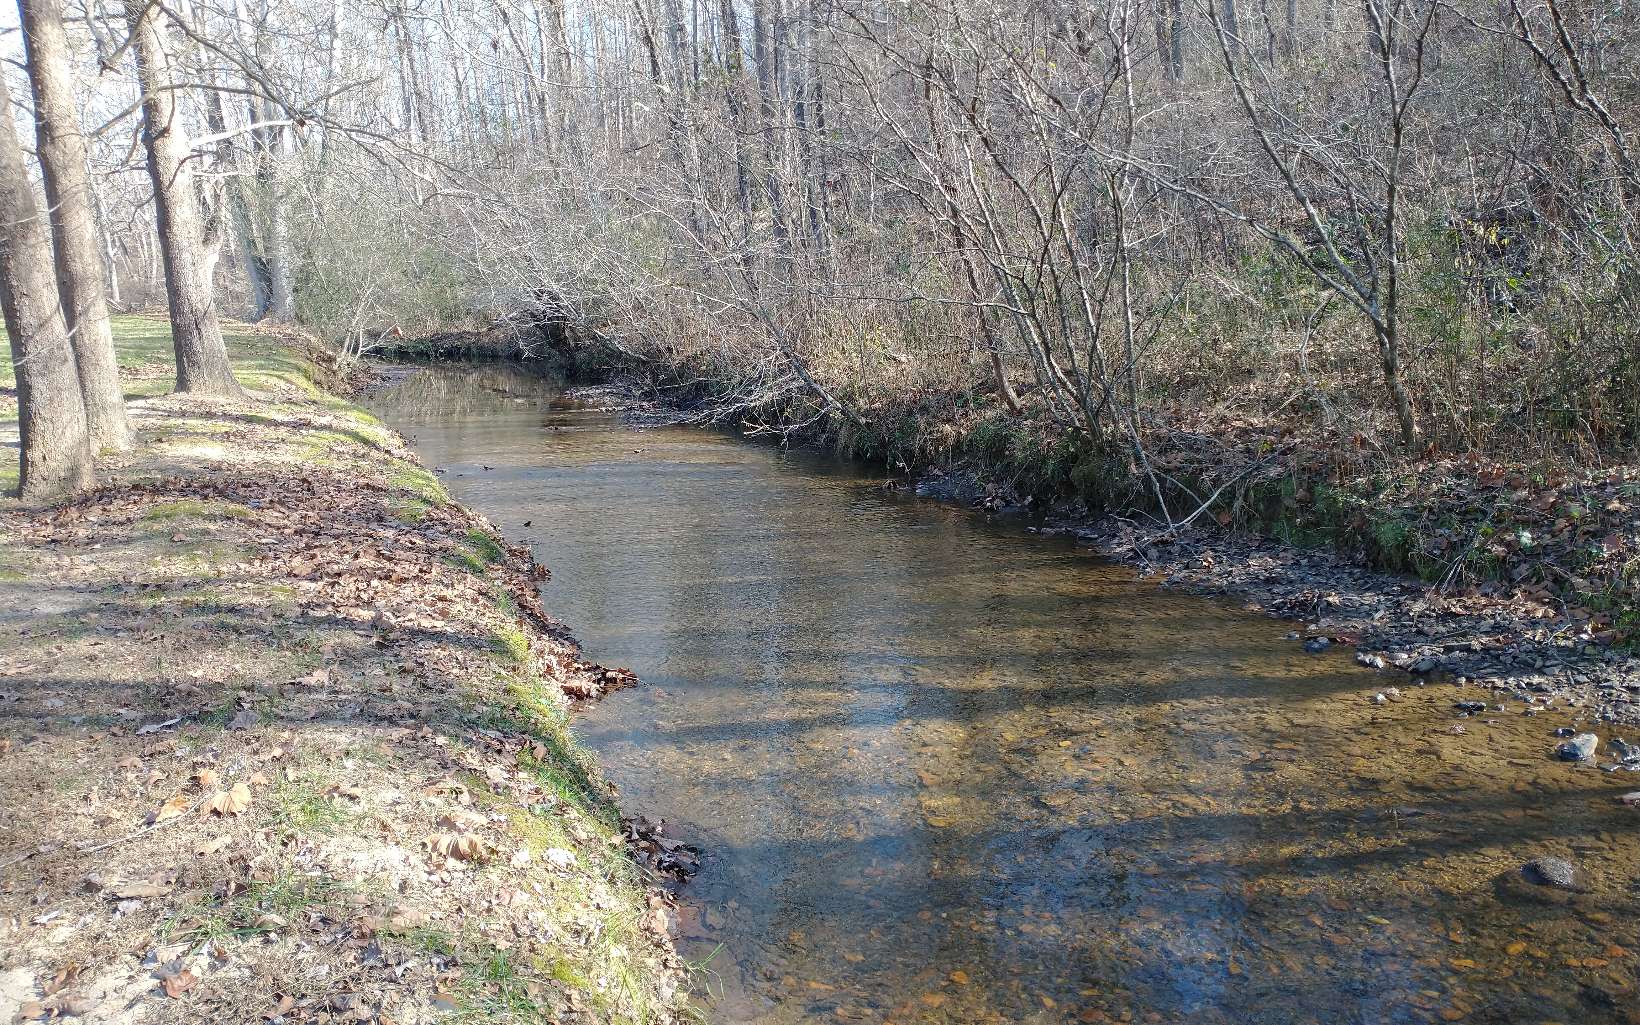 Beautiful laying 1.137 acres on fast flowing Trout Stream (Bell Creek). Very light restrictions and no HOA fees, no RV's or Mobile Homes as permanent residence. Only minutes from Downtown Hiawassee. This is the best opportunity to own Creekfront property, 155' of it !!! Don't let this one get away from you.